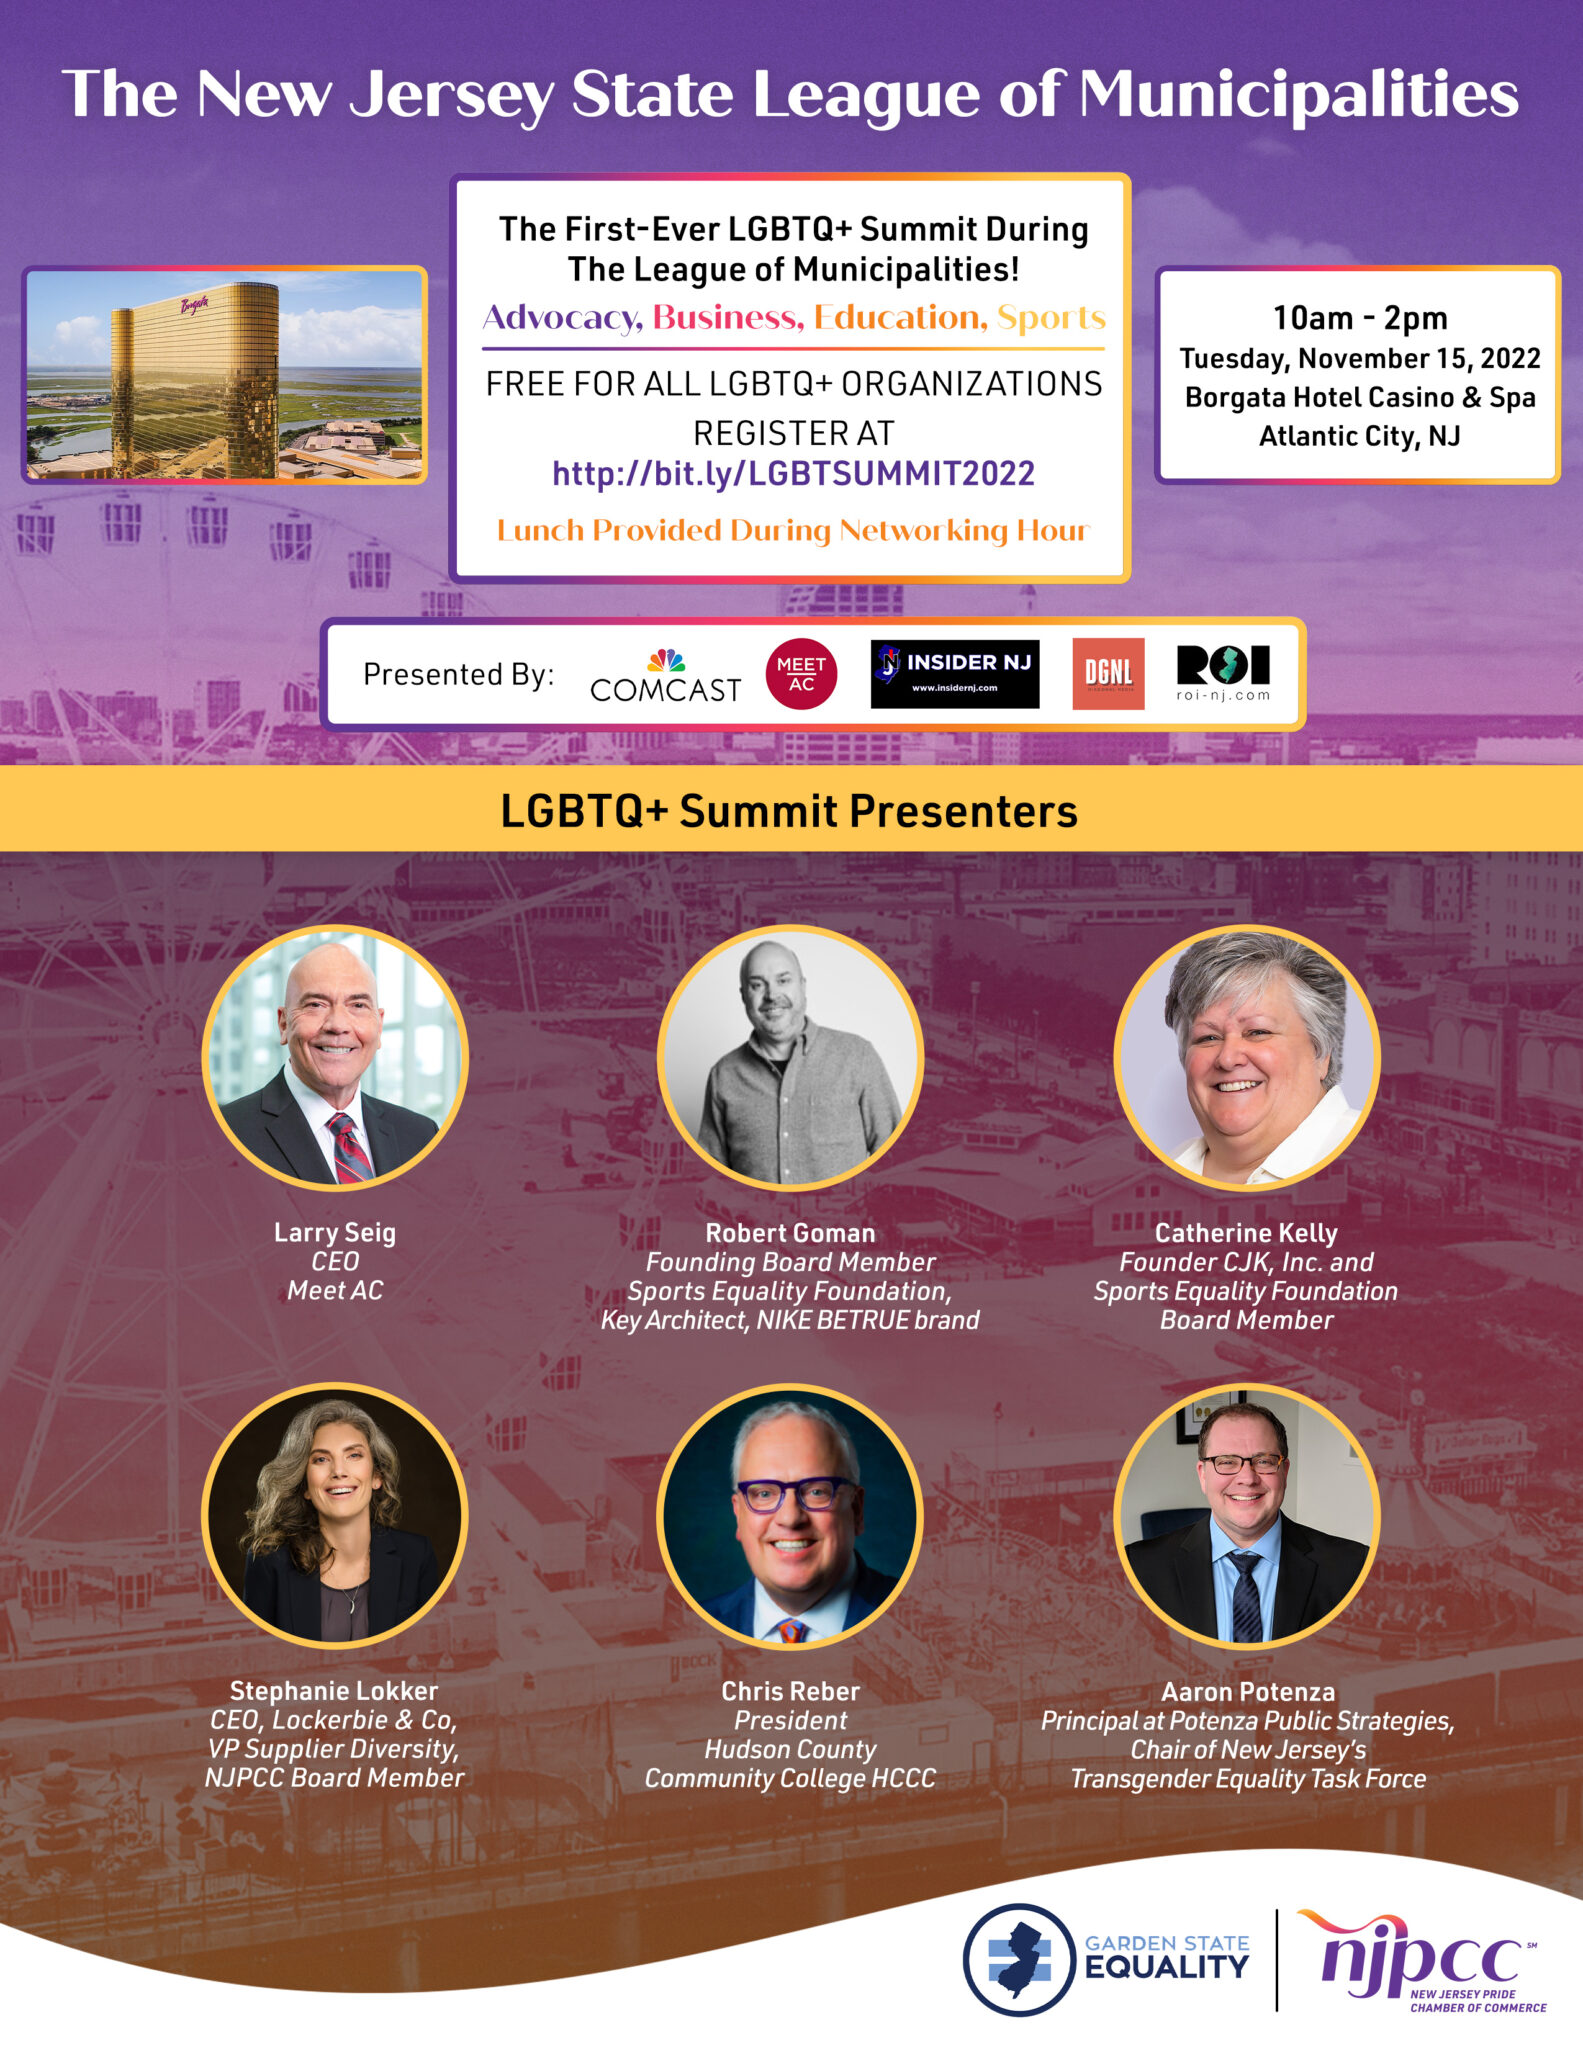 NJ Pride Chamber & Garden State Equality Hosts FirstEver LGBT+ Summit